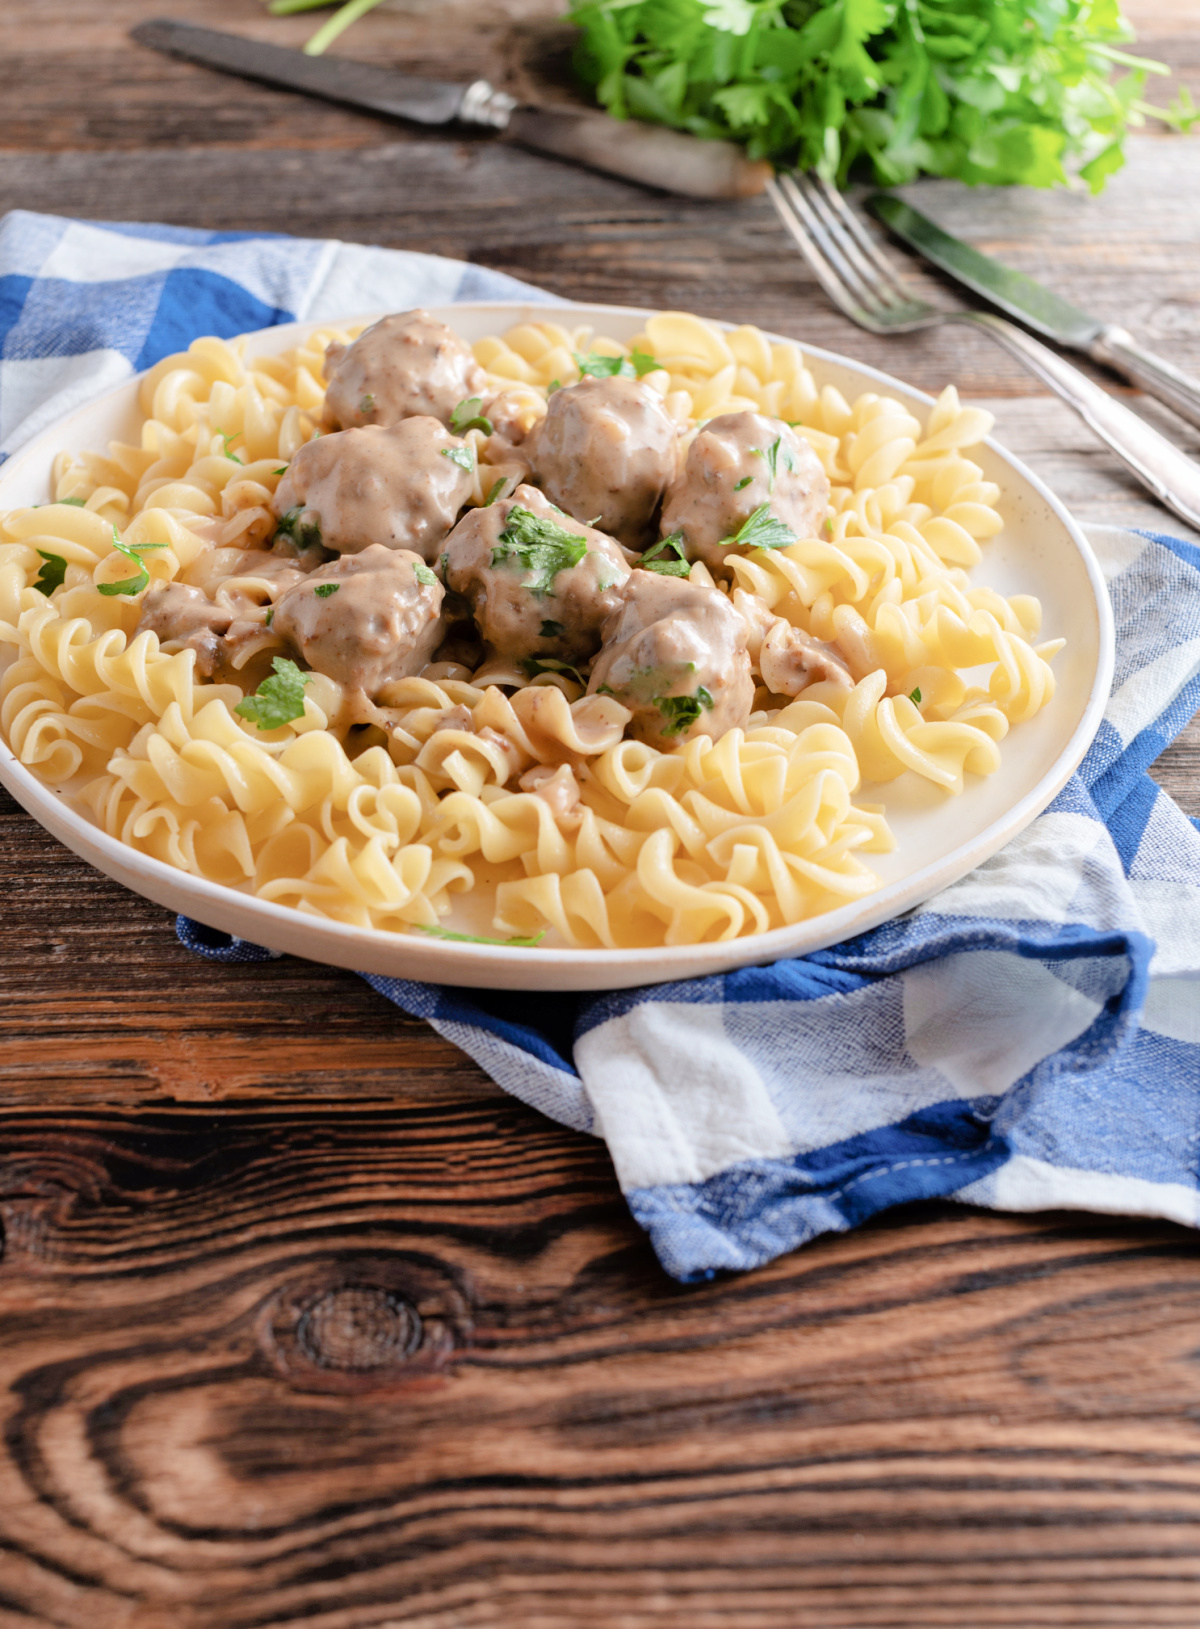 Swedish meatballs in an epic cream sauce over egg noodles